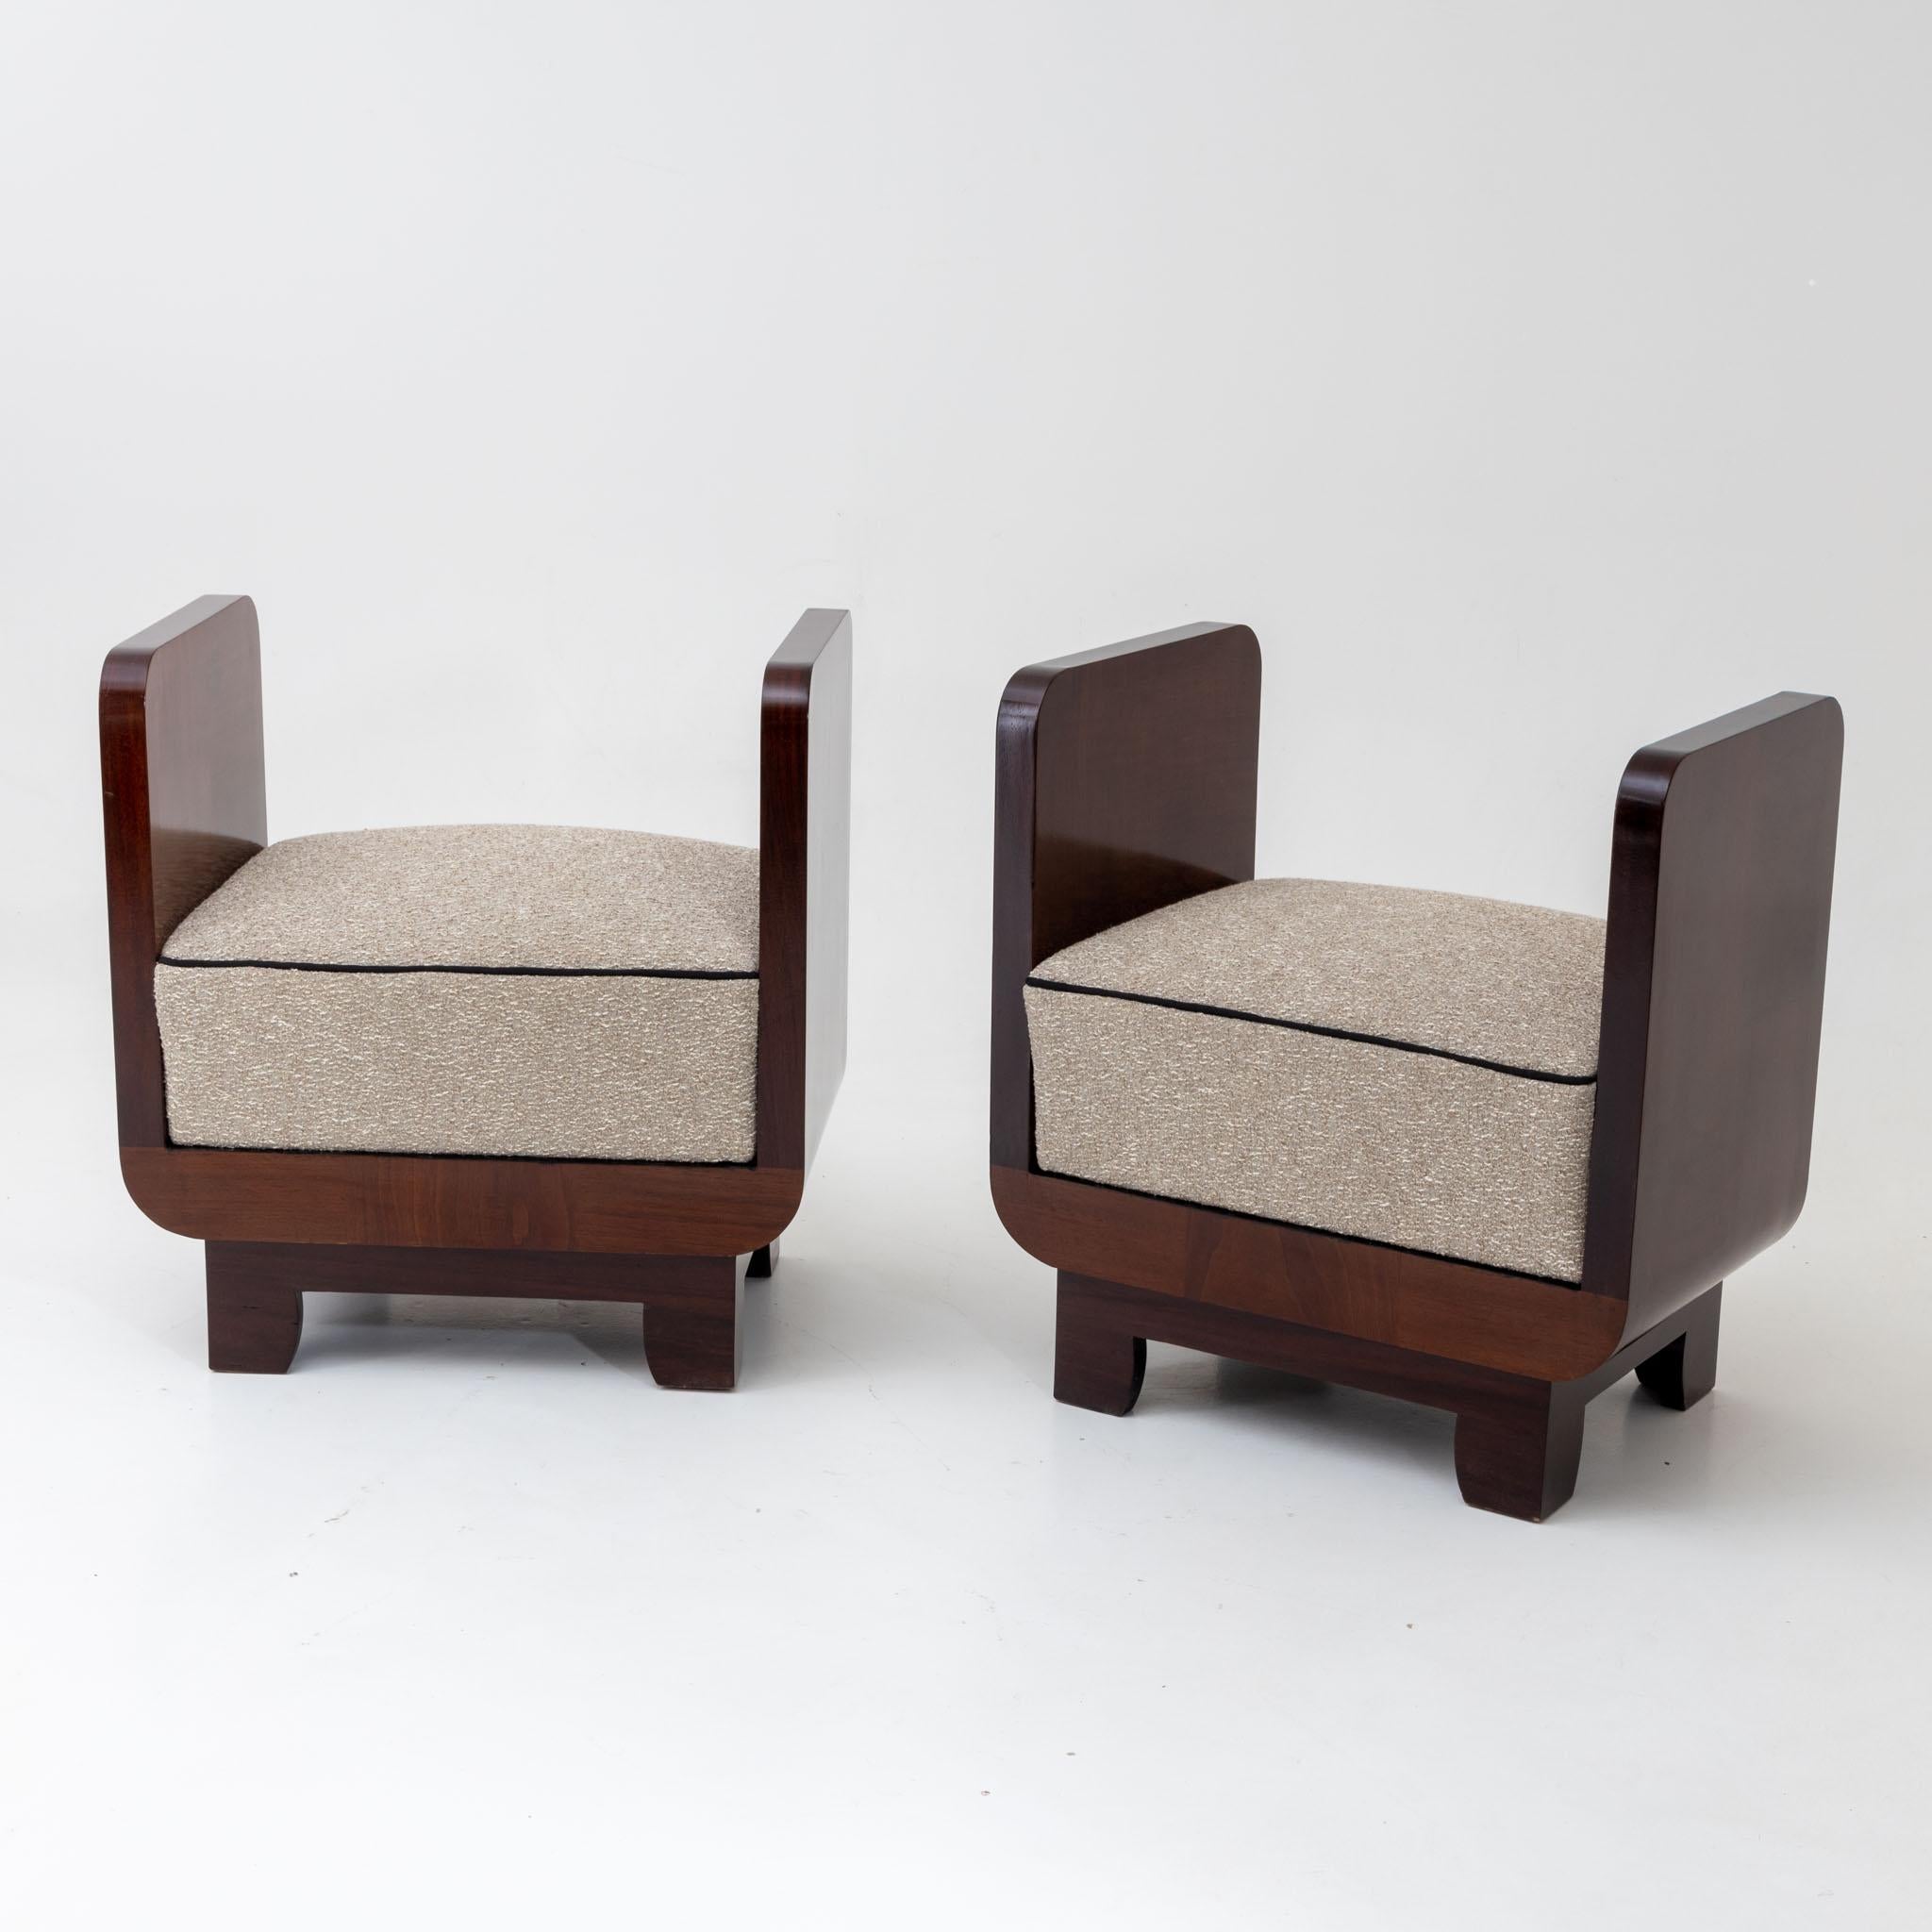 A pair of Art Deco wood stools. 
Featuring marquetry patterned sides.